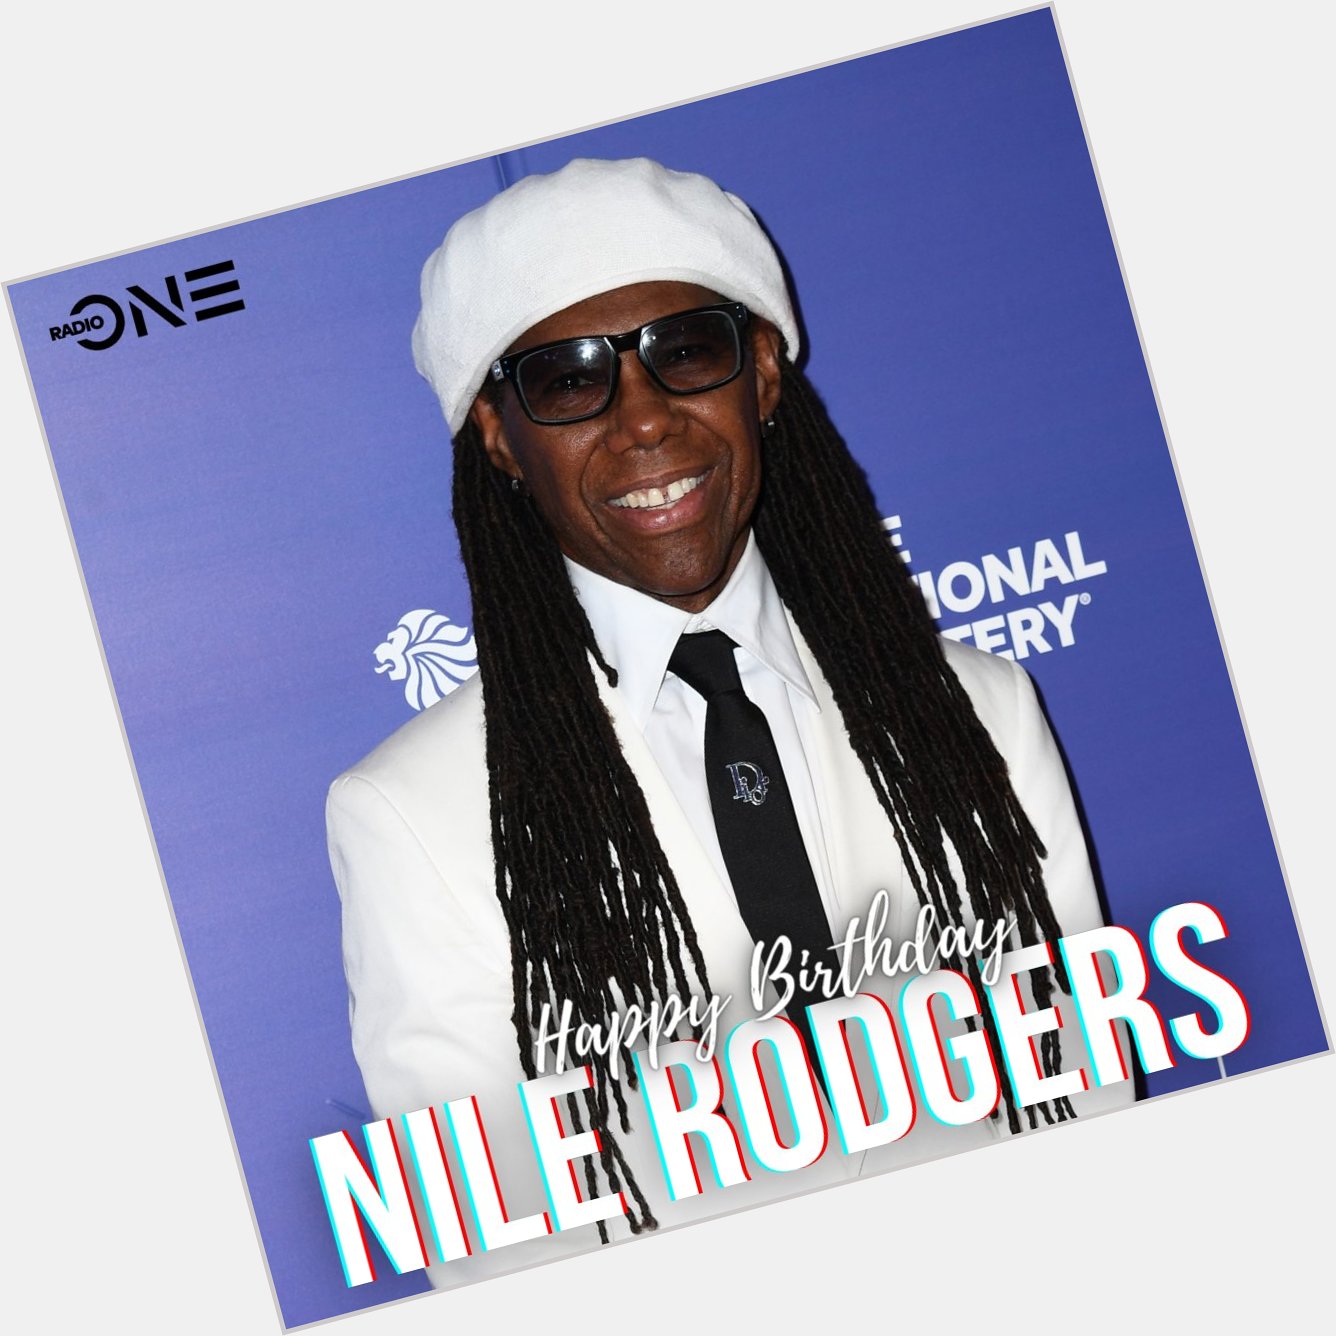 Wishing music legend Nile Rodgers a very happy birthday 